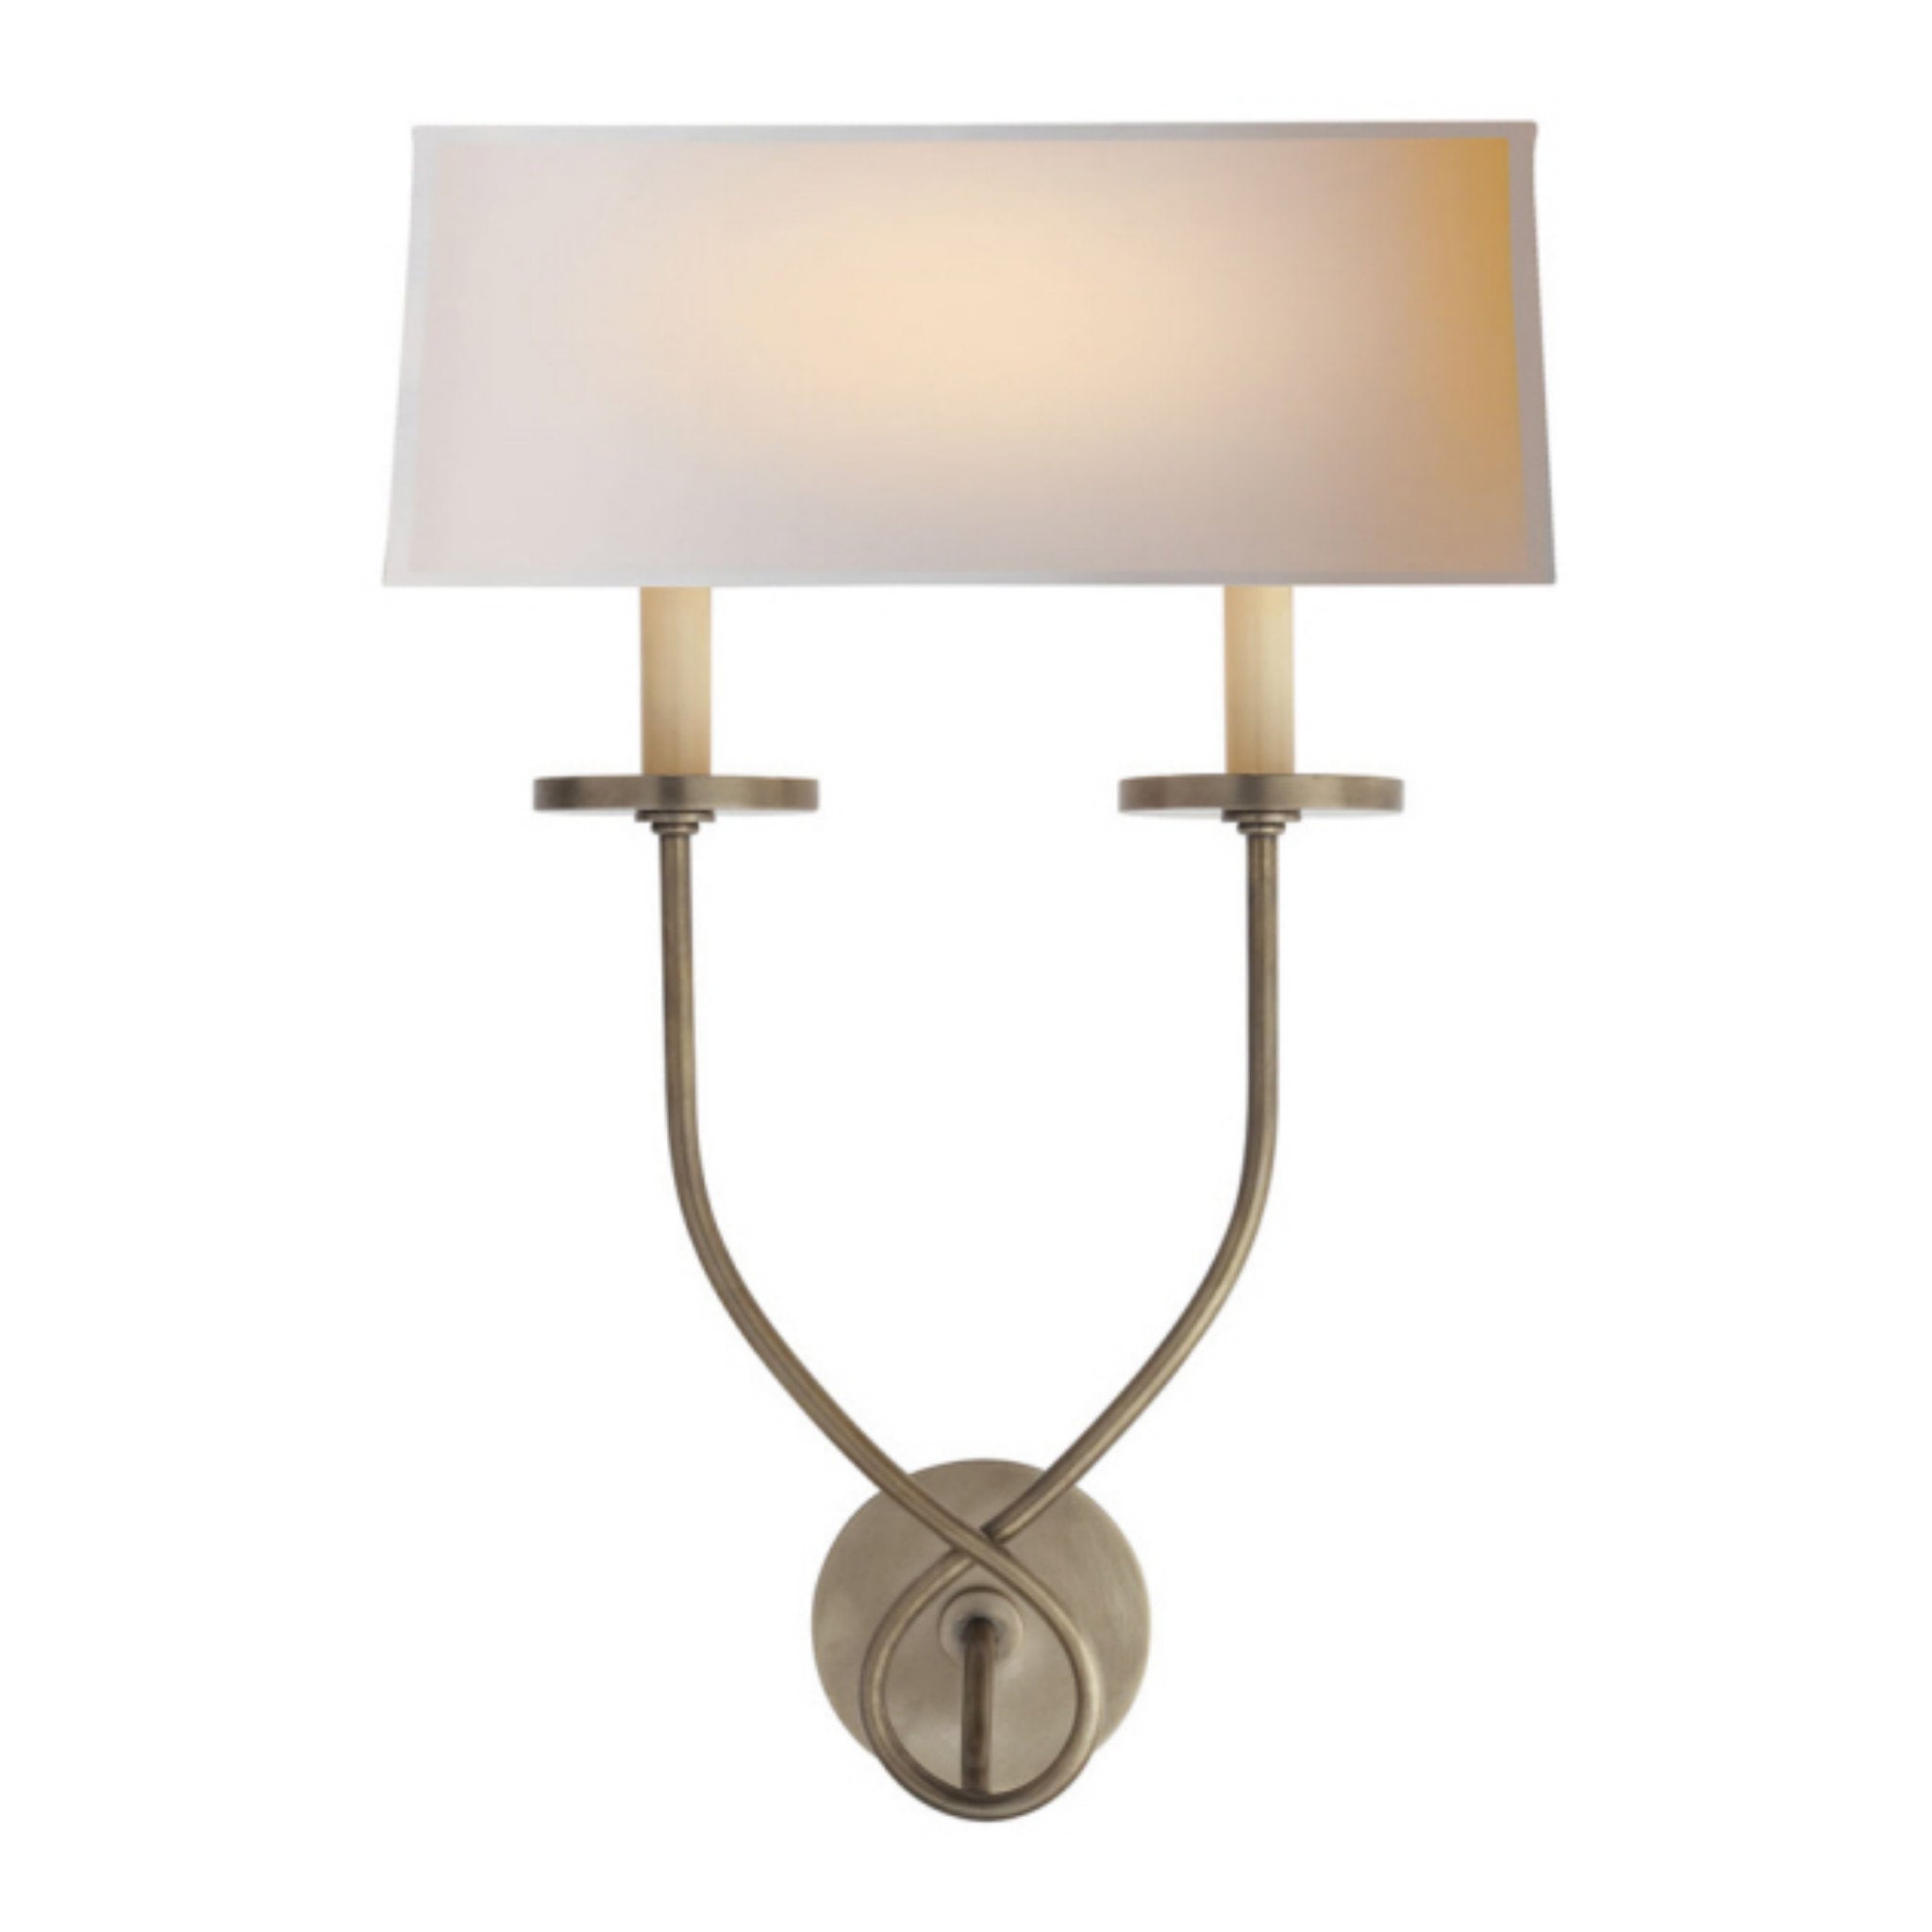 Chapman & Myers Symmetric Twist Double Sconce in Antique Nickel with Natural Paper Shade